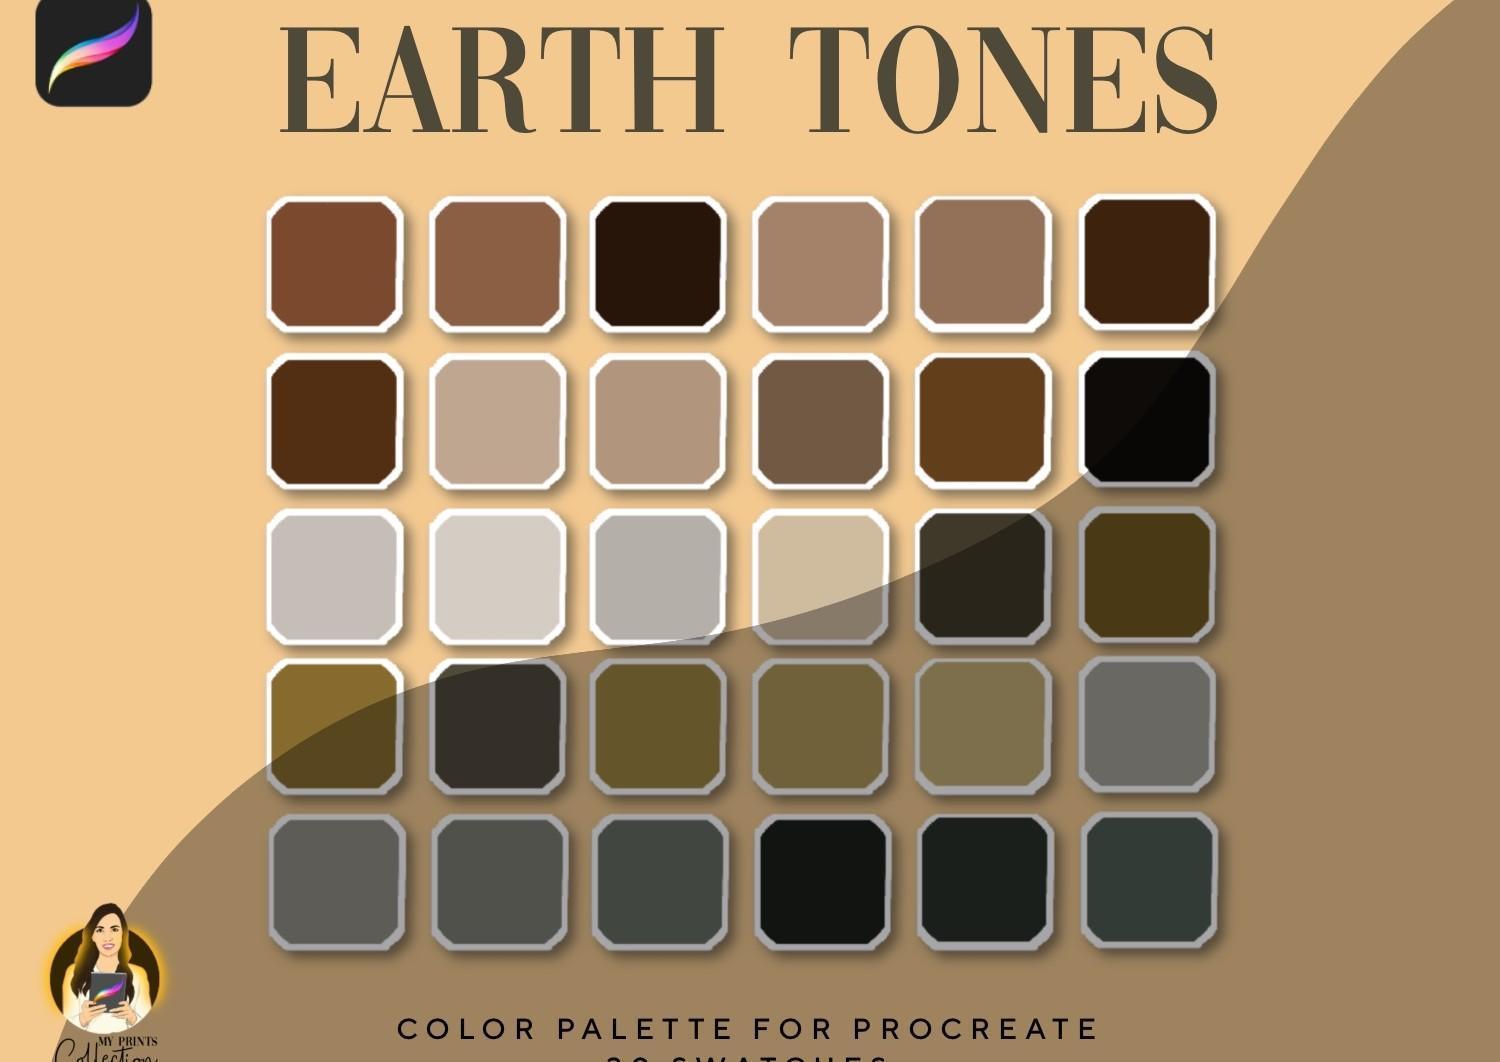 Earth Tones Procreate Color Palette | 30 Swatch | Fresh Tones | Summer Tones | Nature | Brown - mpc procreate swatch earth tones cover -